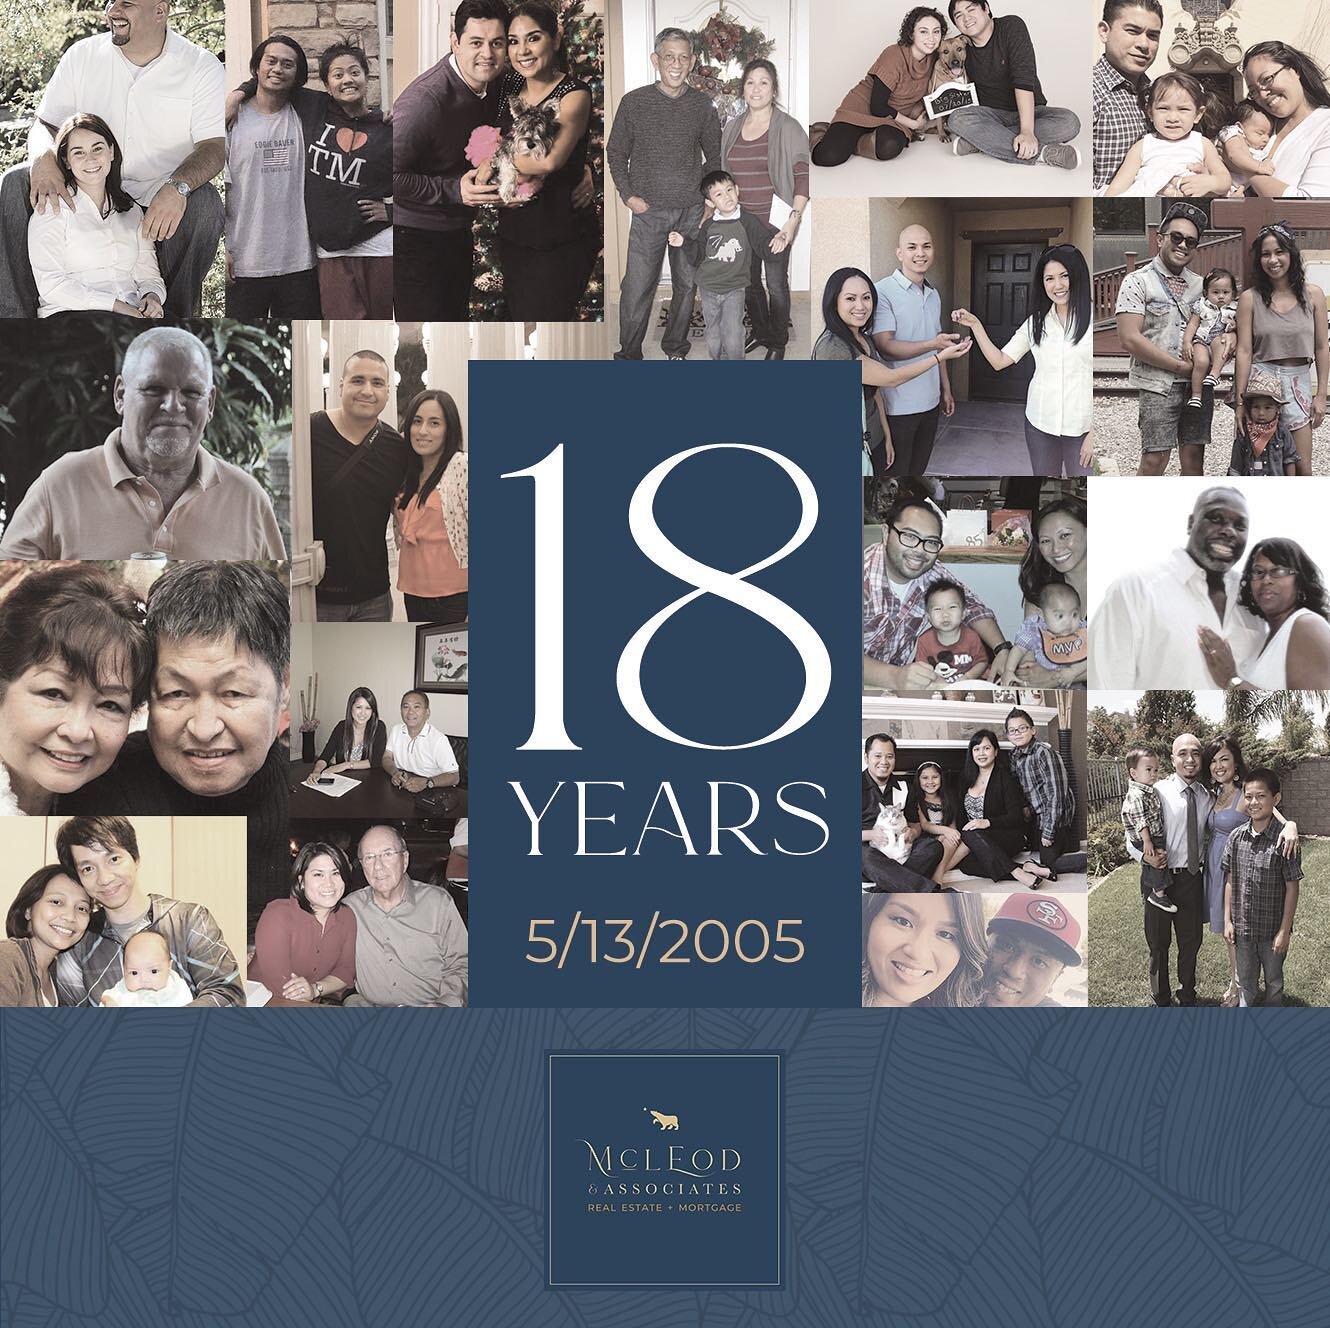 Our journey leading to 18 years in business would not have been possible without these beautiful families. 

Thankful for all of our clients (from then to now) for allowing us to be of service for over a decade. Cheers and Happy Anniversary McLeod &a